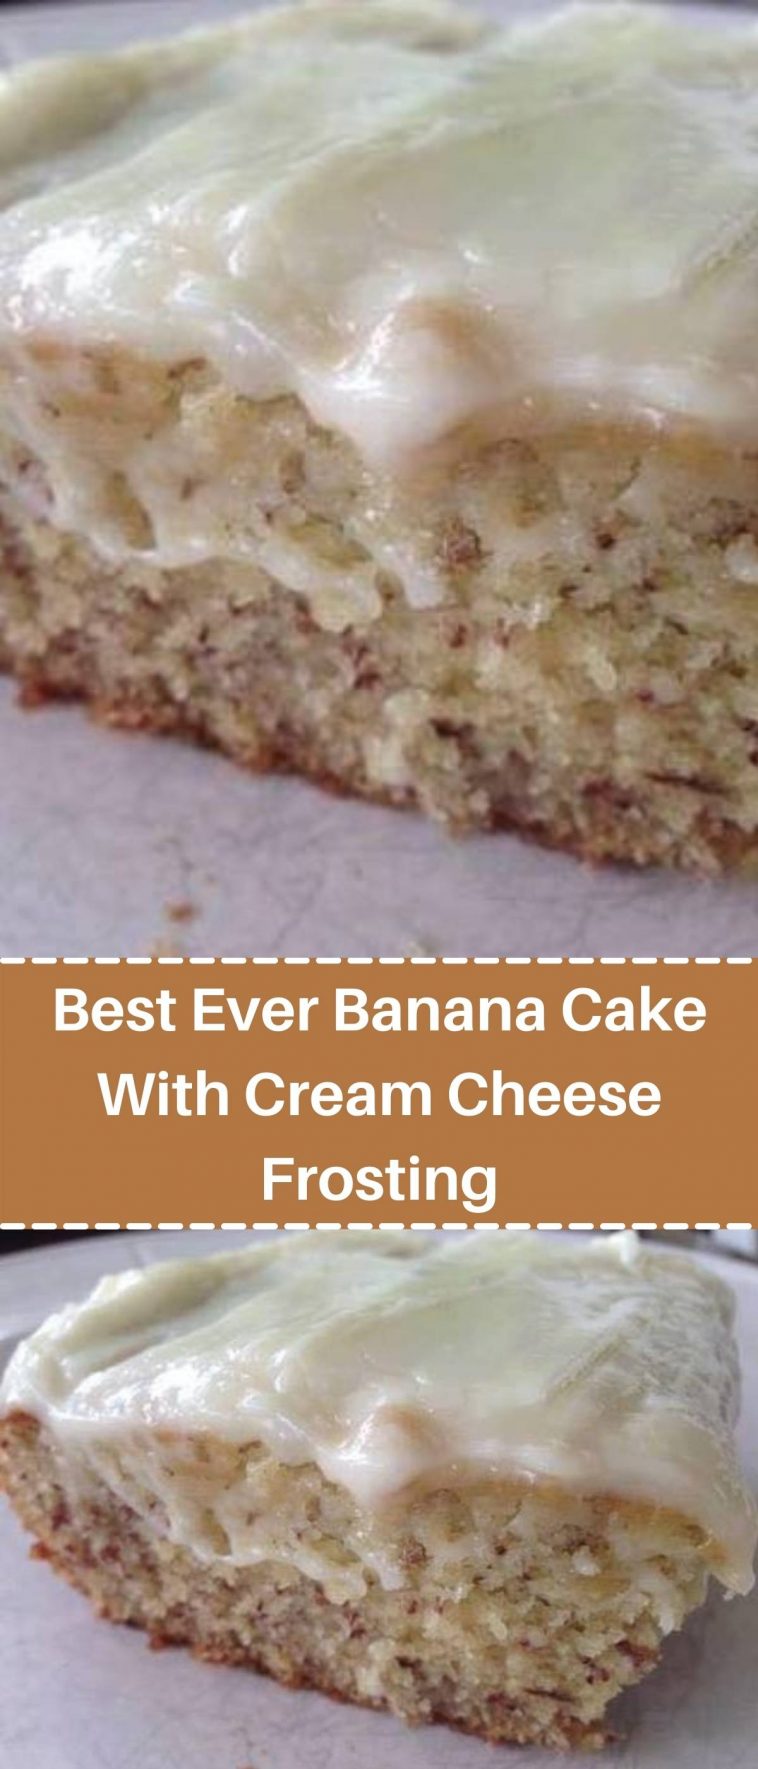 Best Ever Banana Cake With Cream Cheese Frosting